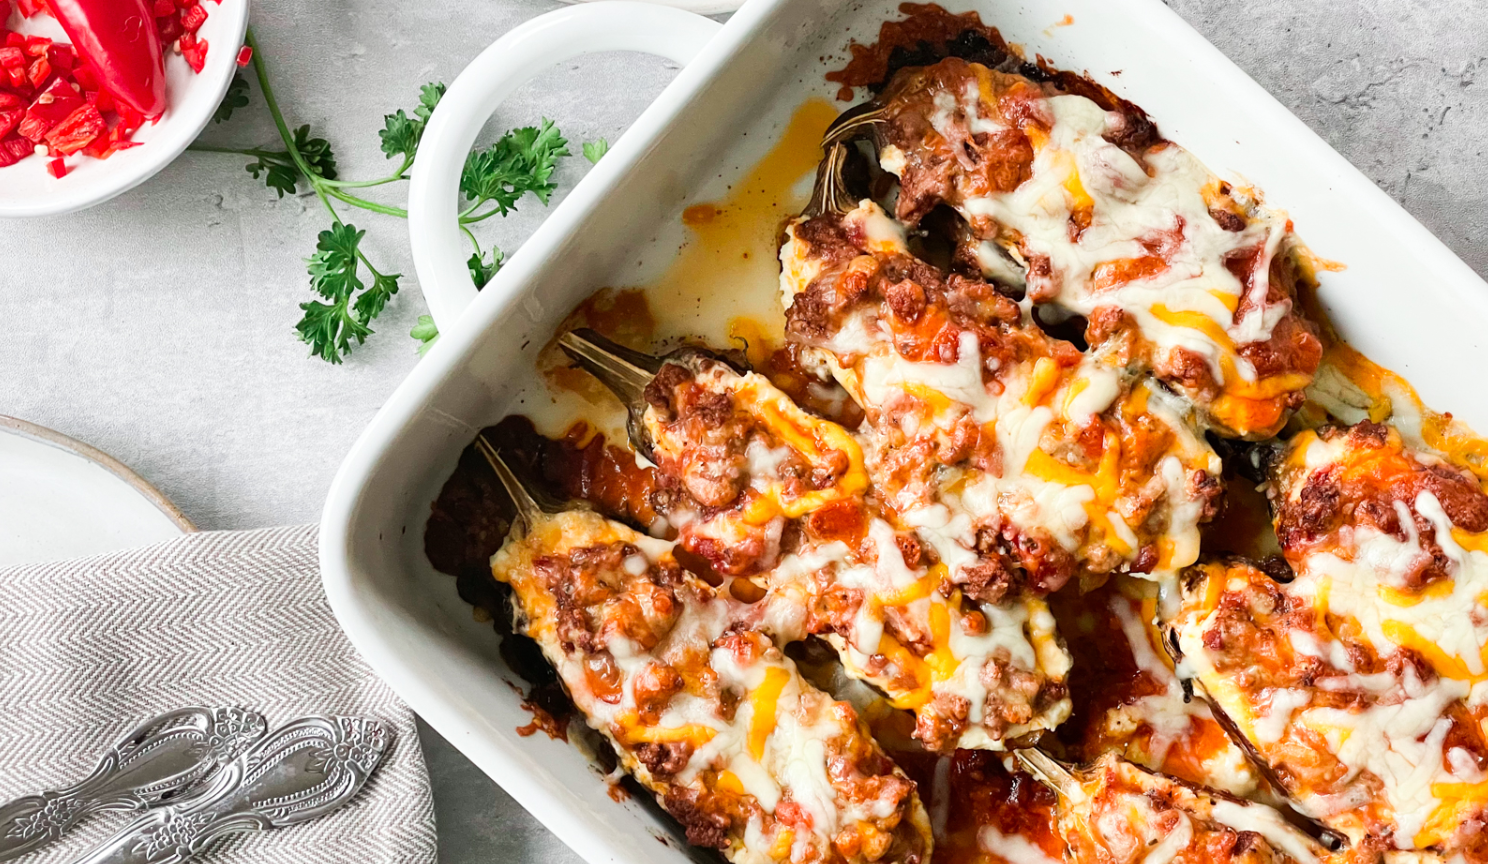 Baked eggplants in the oven